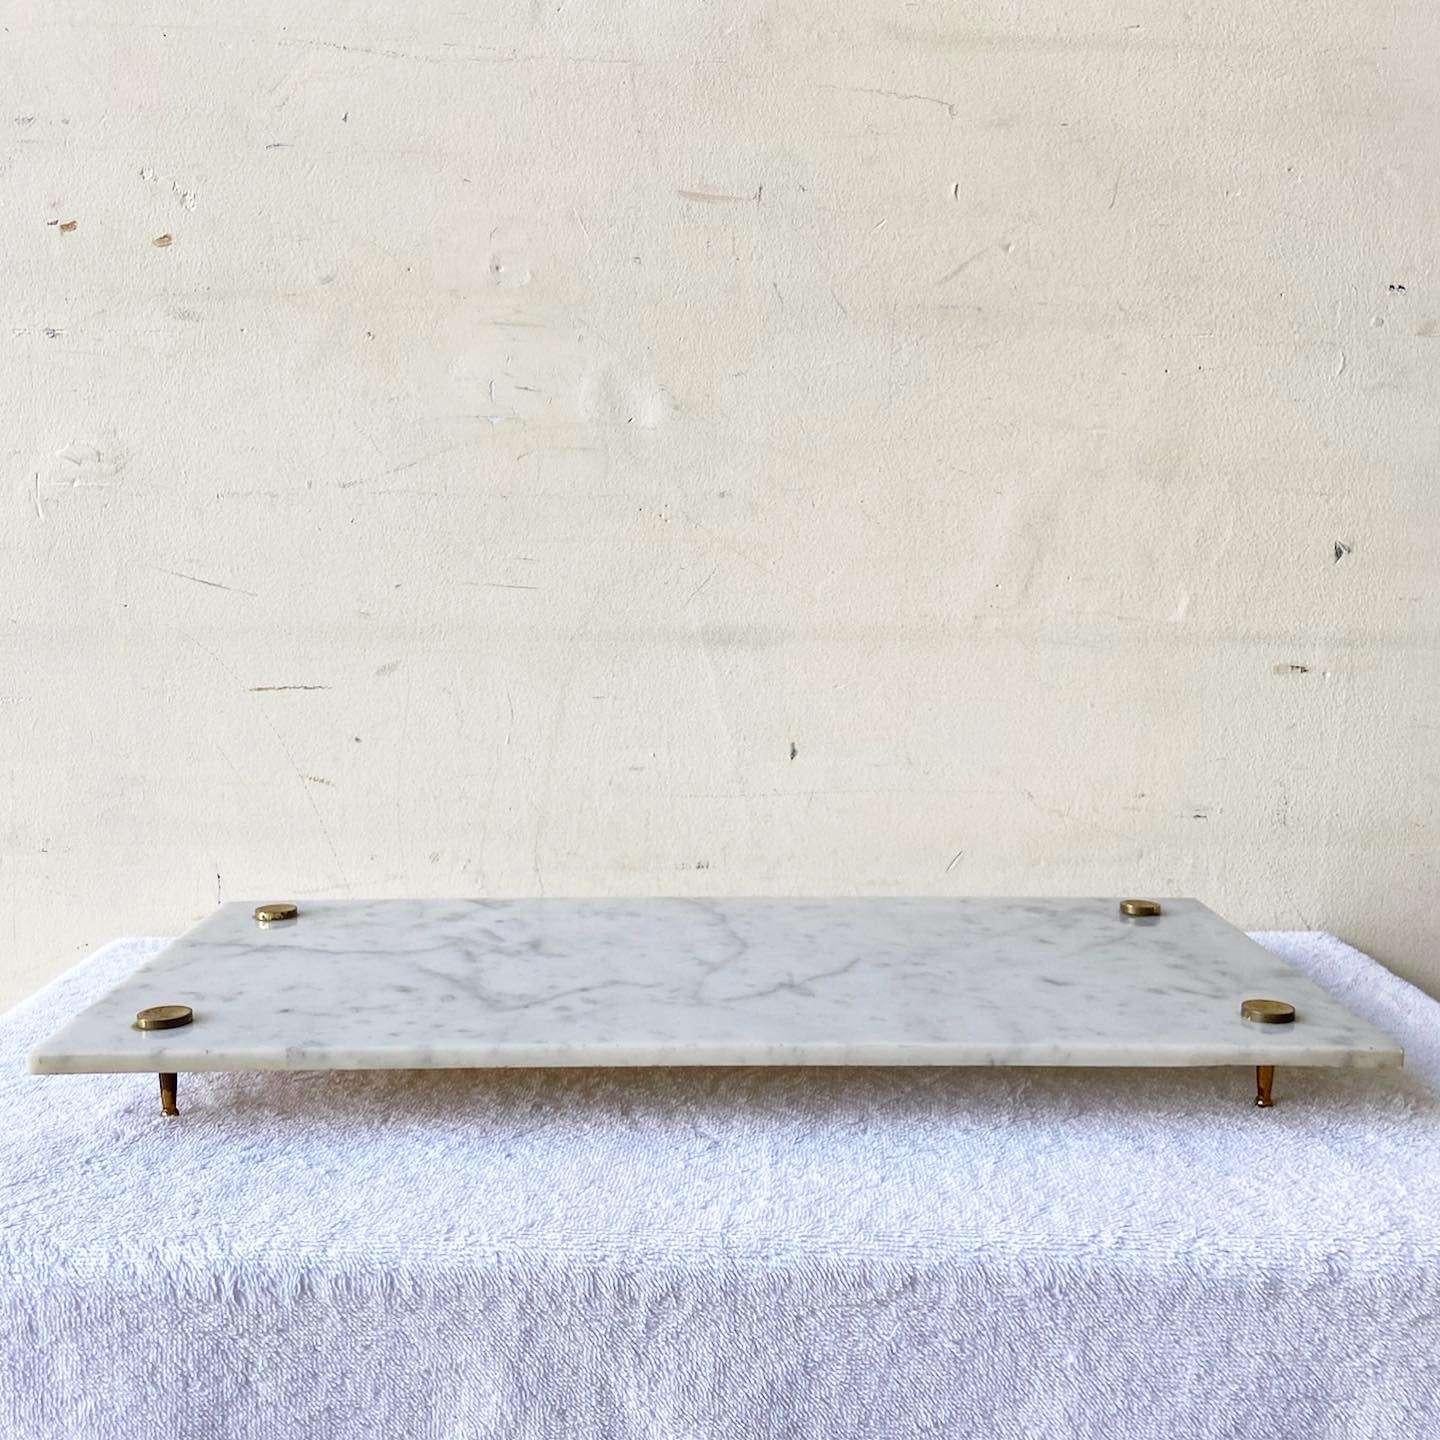 Amazing vintage Italian marble vanity tray. Features 4 little golden legs with a rectangular tray.
